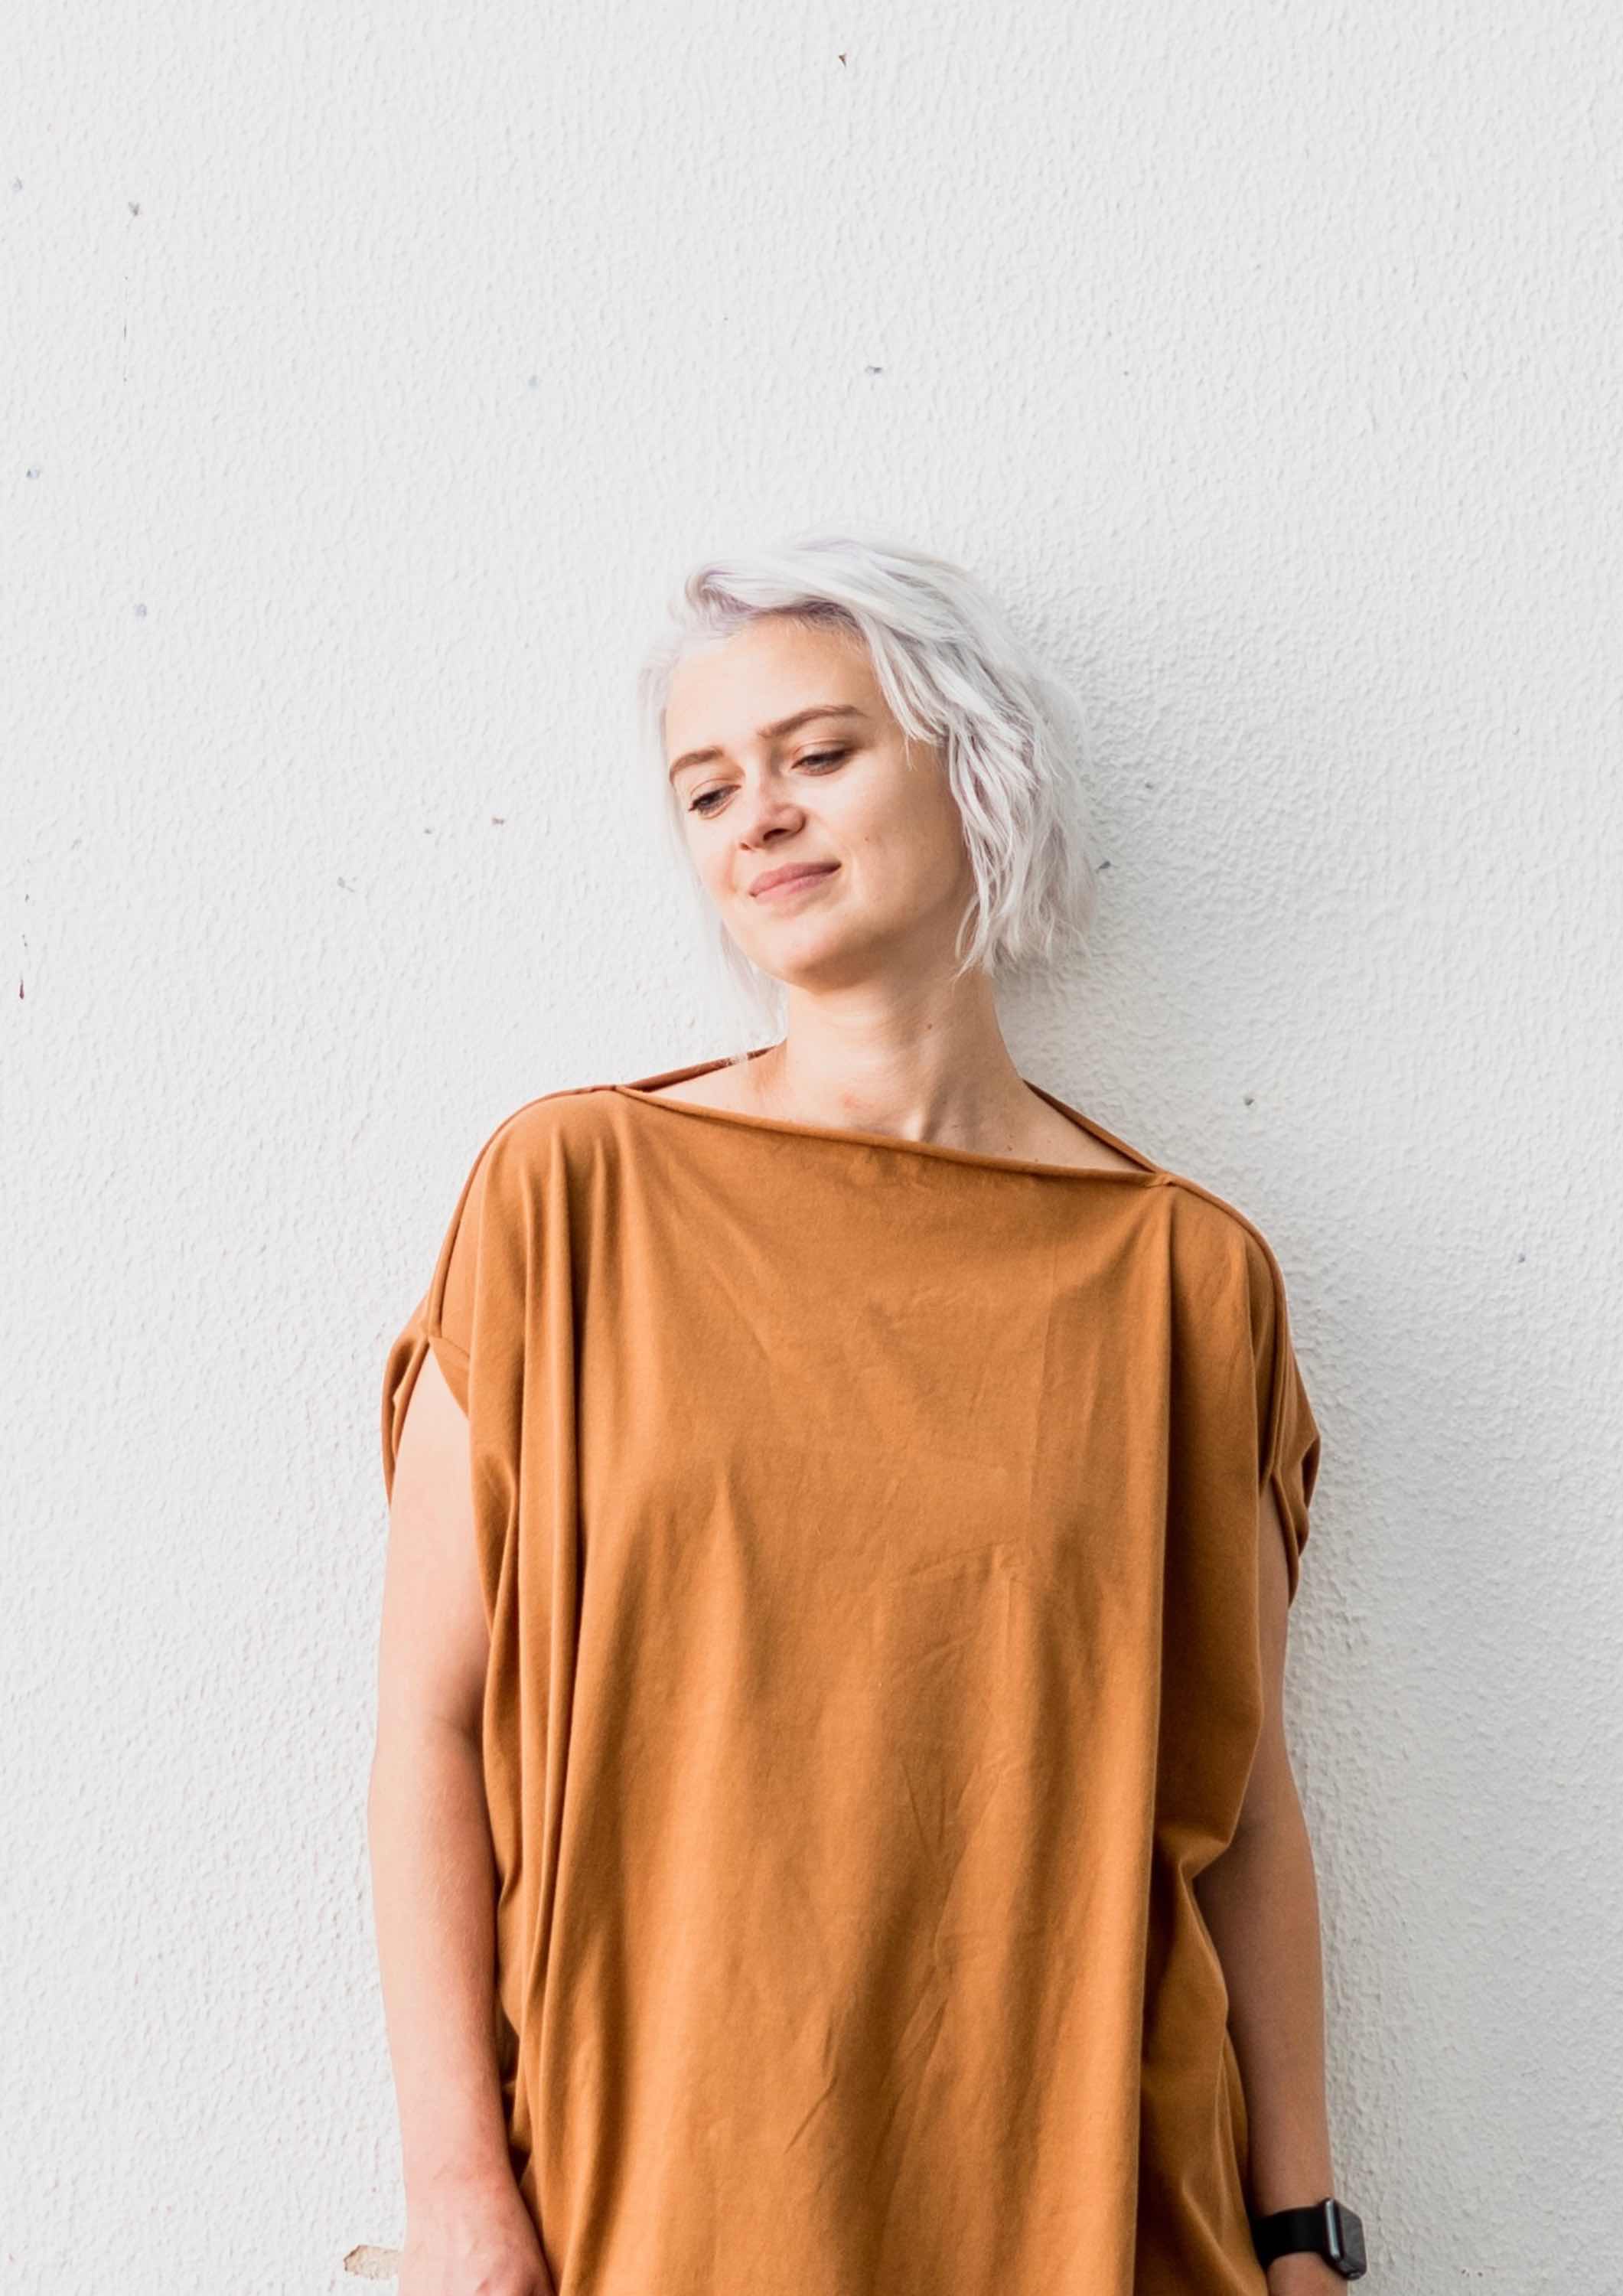 Multifunctional caramel fluid jersey, made from 100% organic cotton. Can be worn as a blouse, vest or poncho. With two sided adjustable drawn strings.